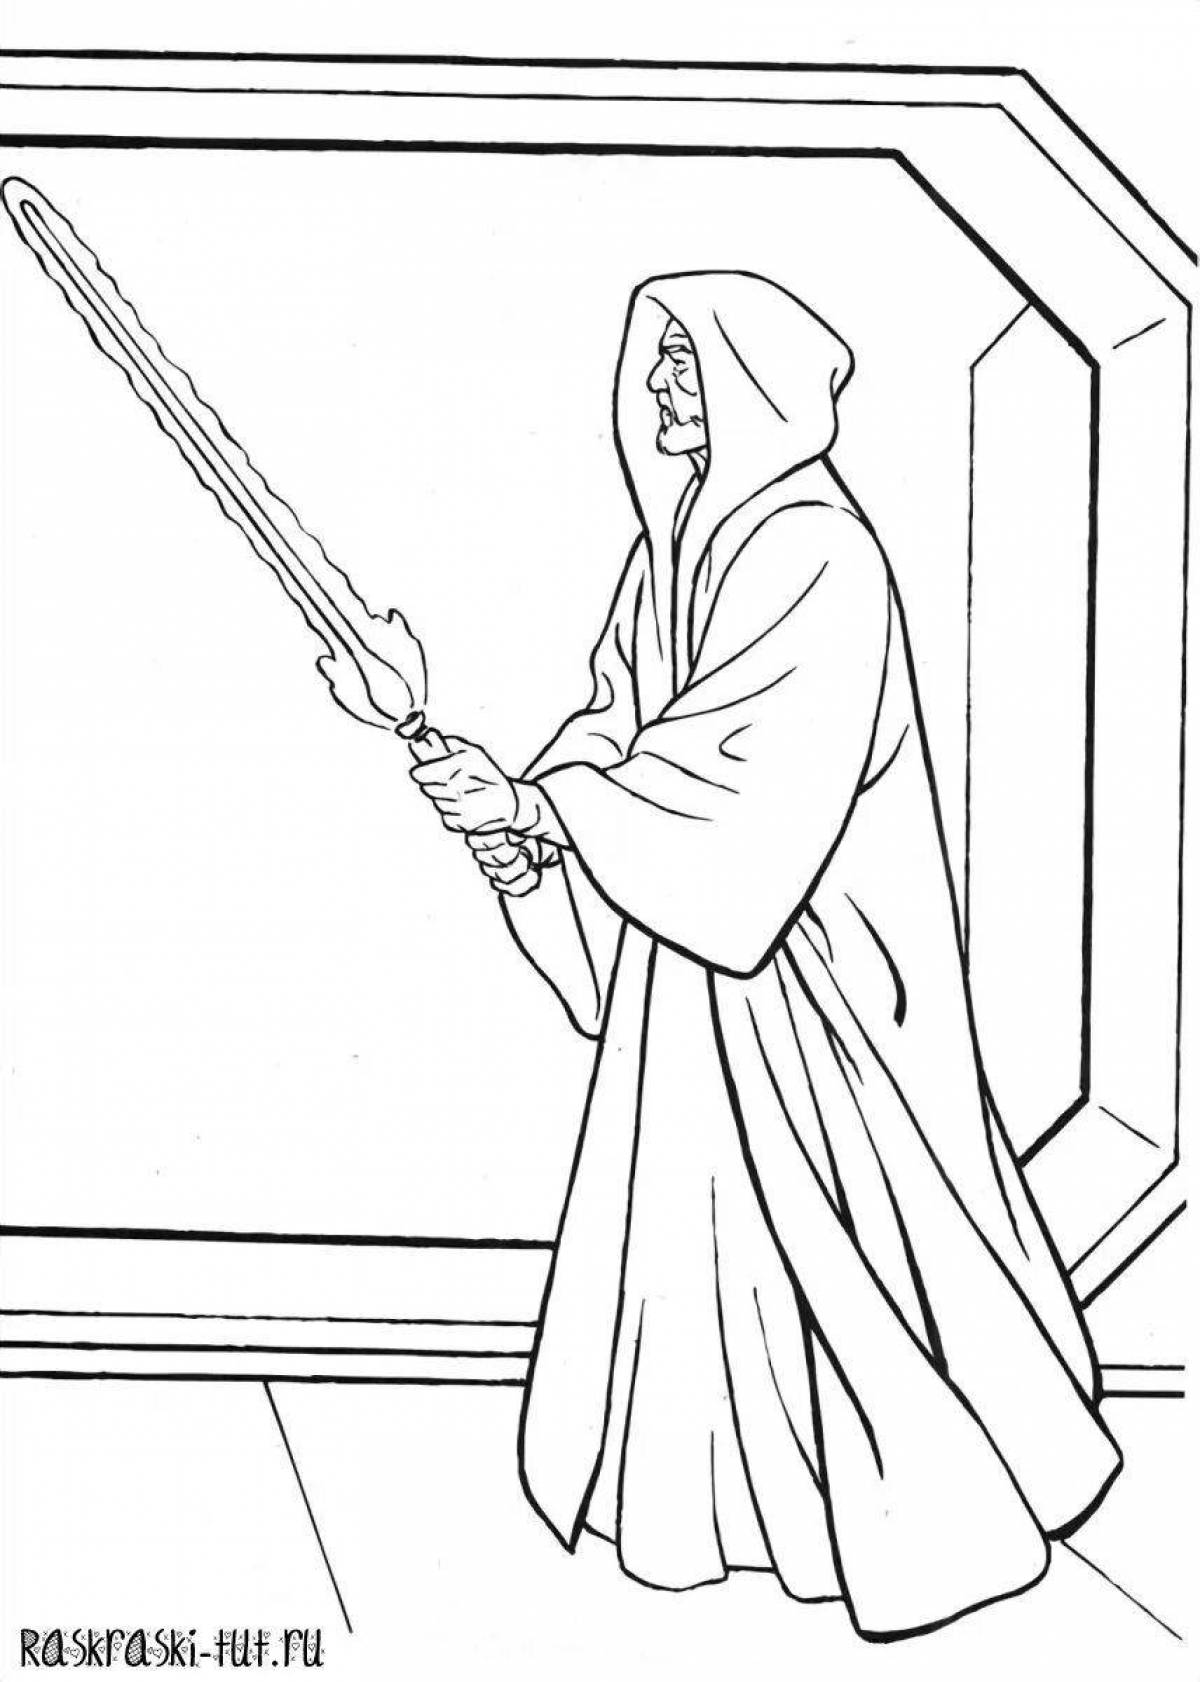 Amazing Star Wars Coloring Pages for Kids